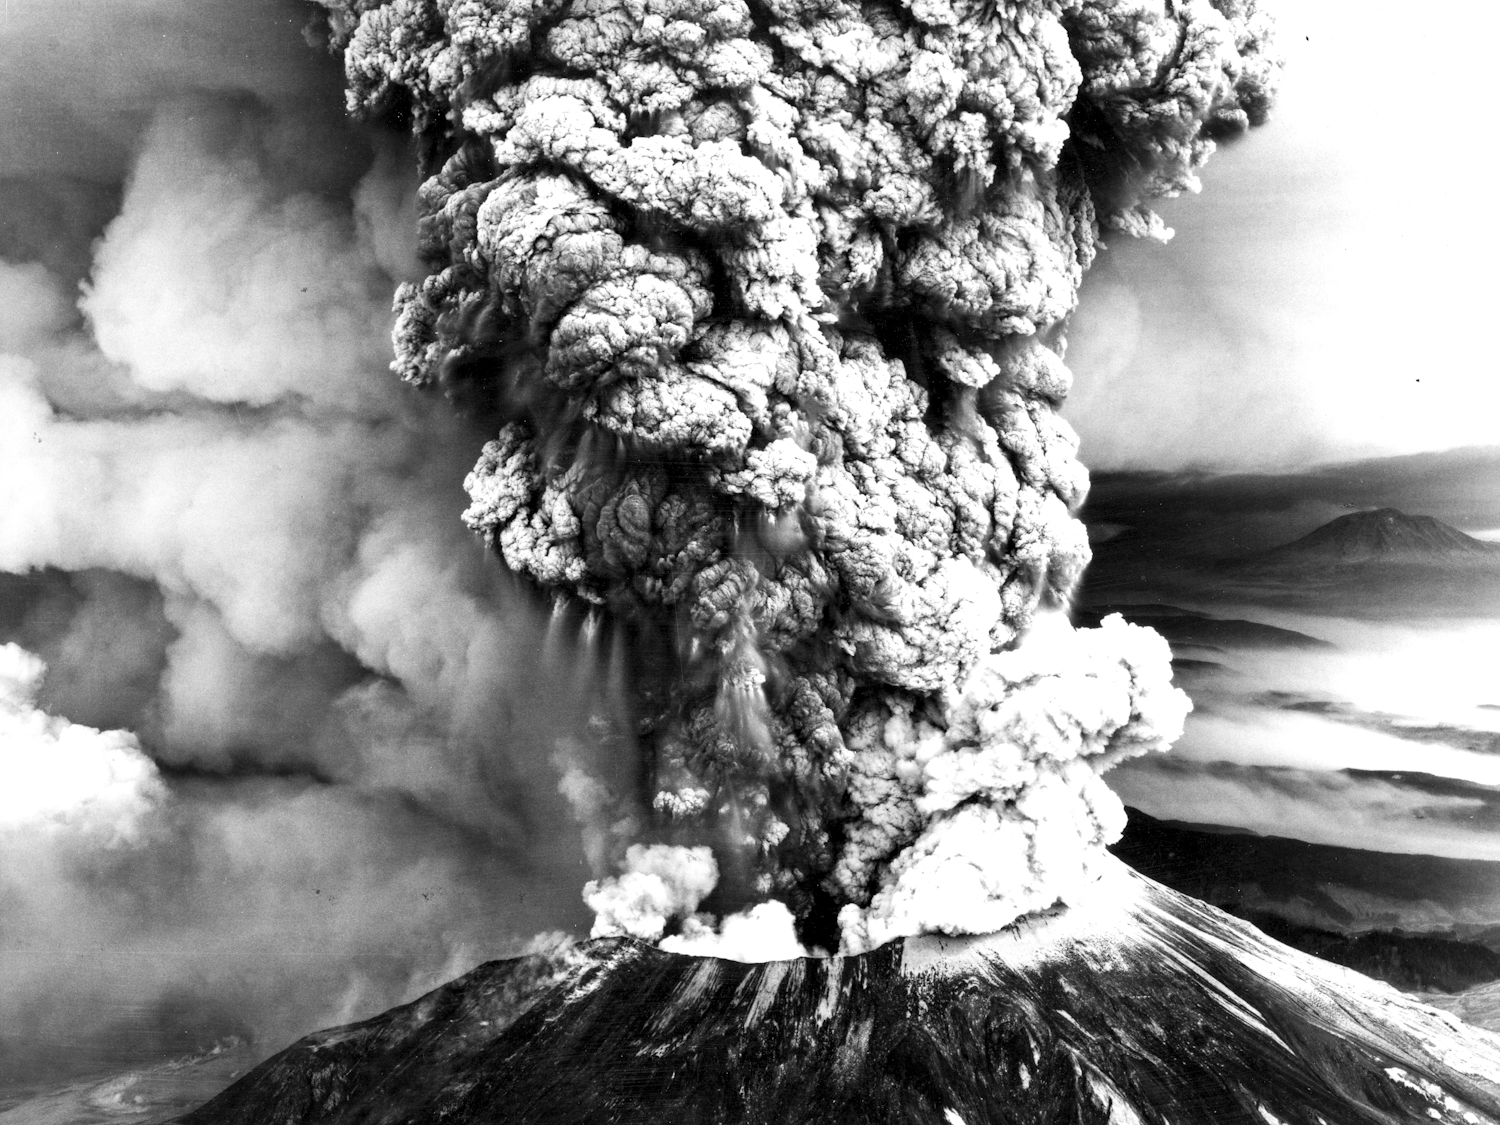 41 Years Ago Today, Volcanic Hazards Awareness Expanded With A Boom